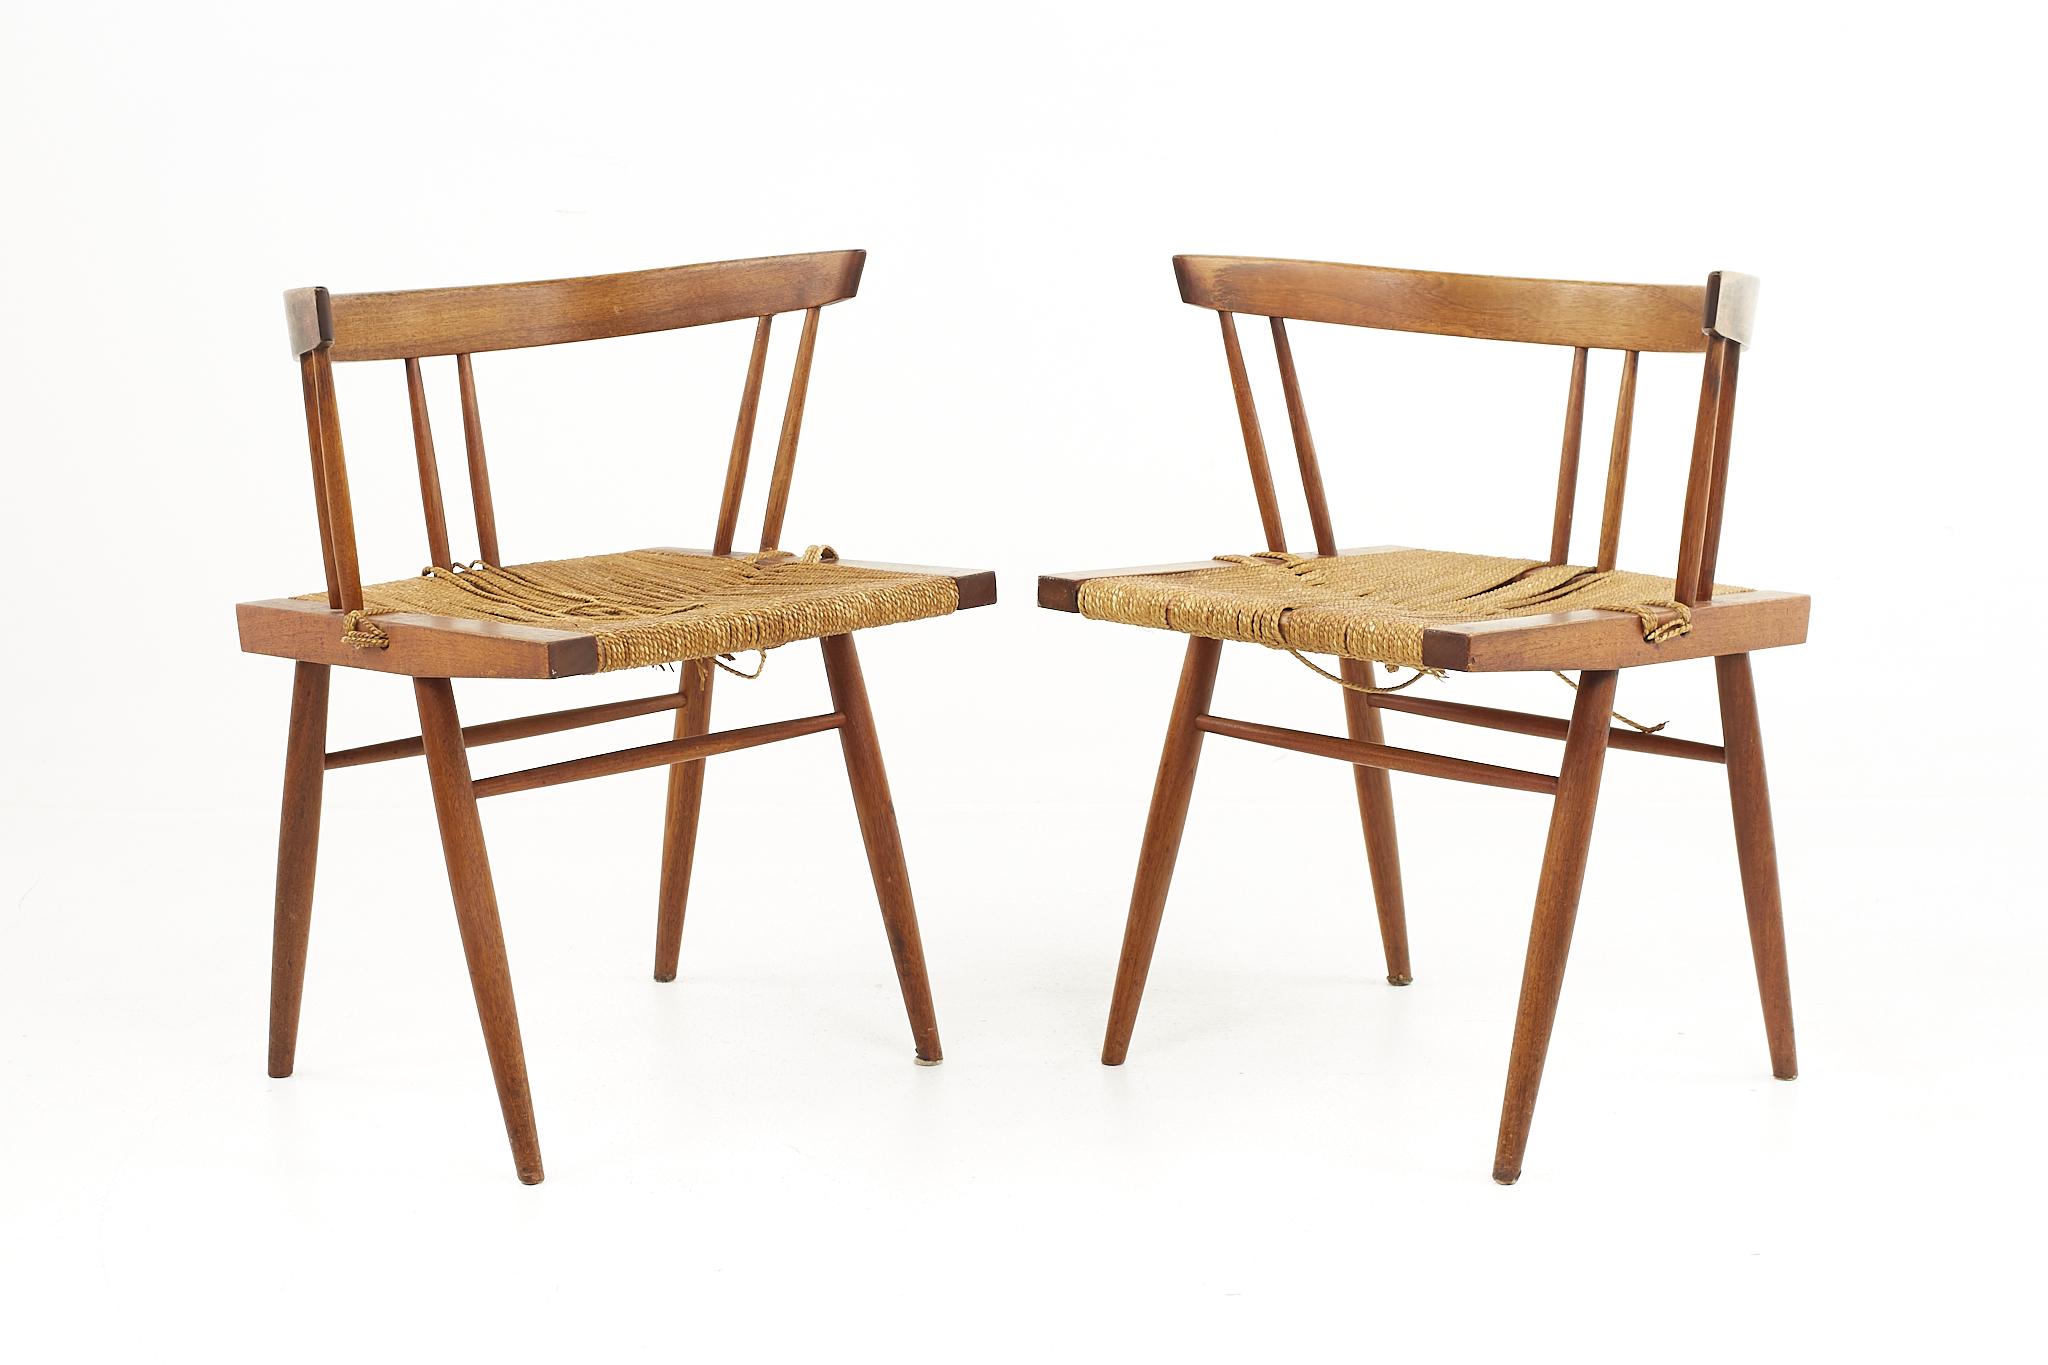 George Nakashima mid century grass chair - a pair

Each chair measures: 22.75 wide x 18.75 deep x 27.5 inches high, with a seat height of 17 and arm height of 27.5 inches

All pieces of furniture can be had in what we call restored vintage